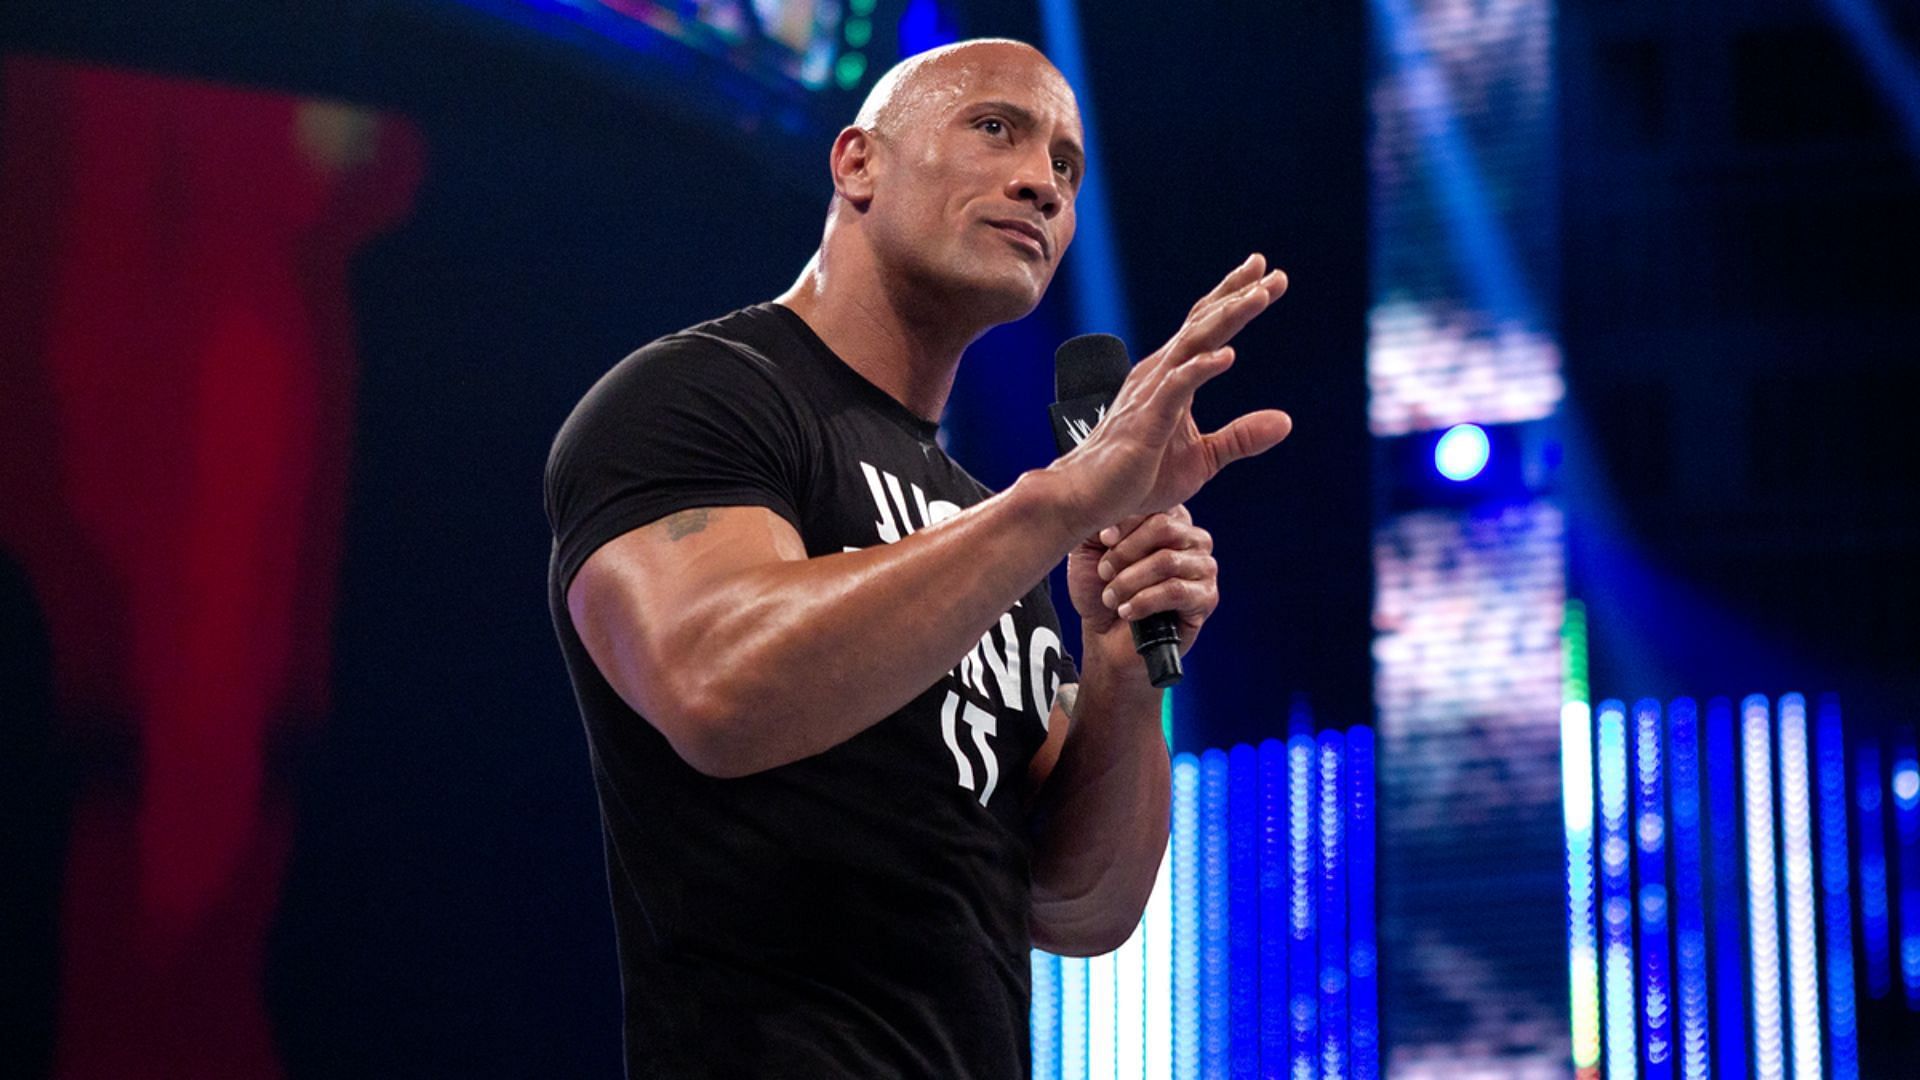 The Rock during a promo. Image Credits: wwe.com 